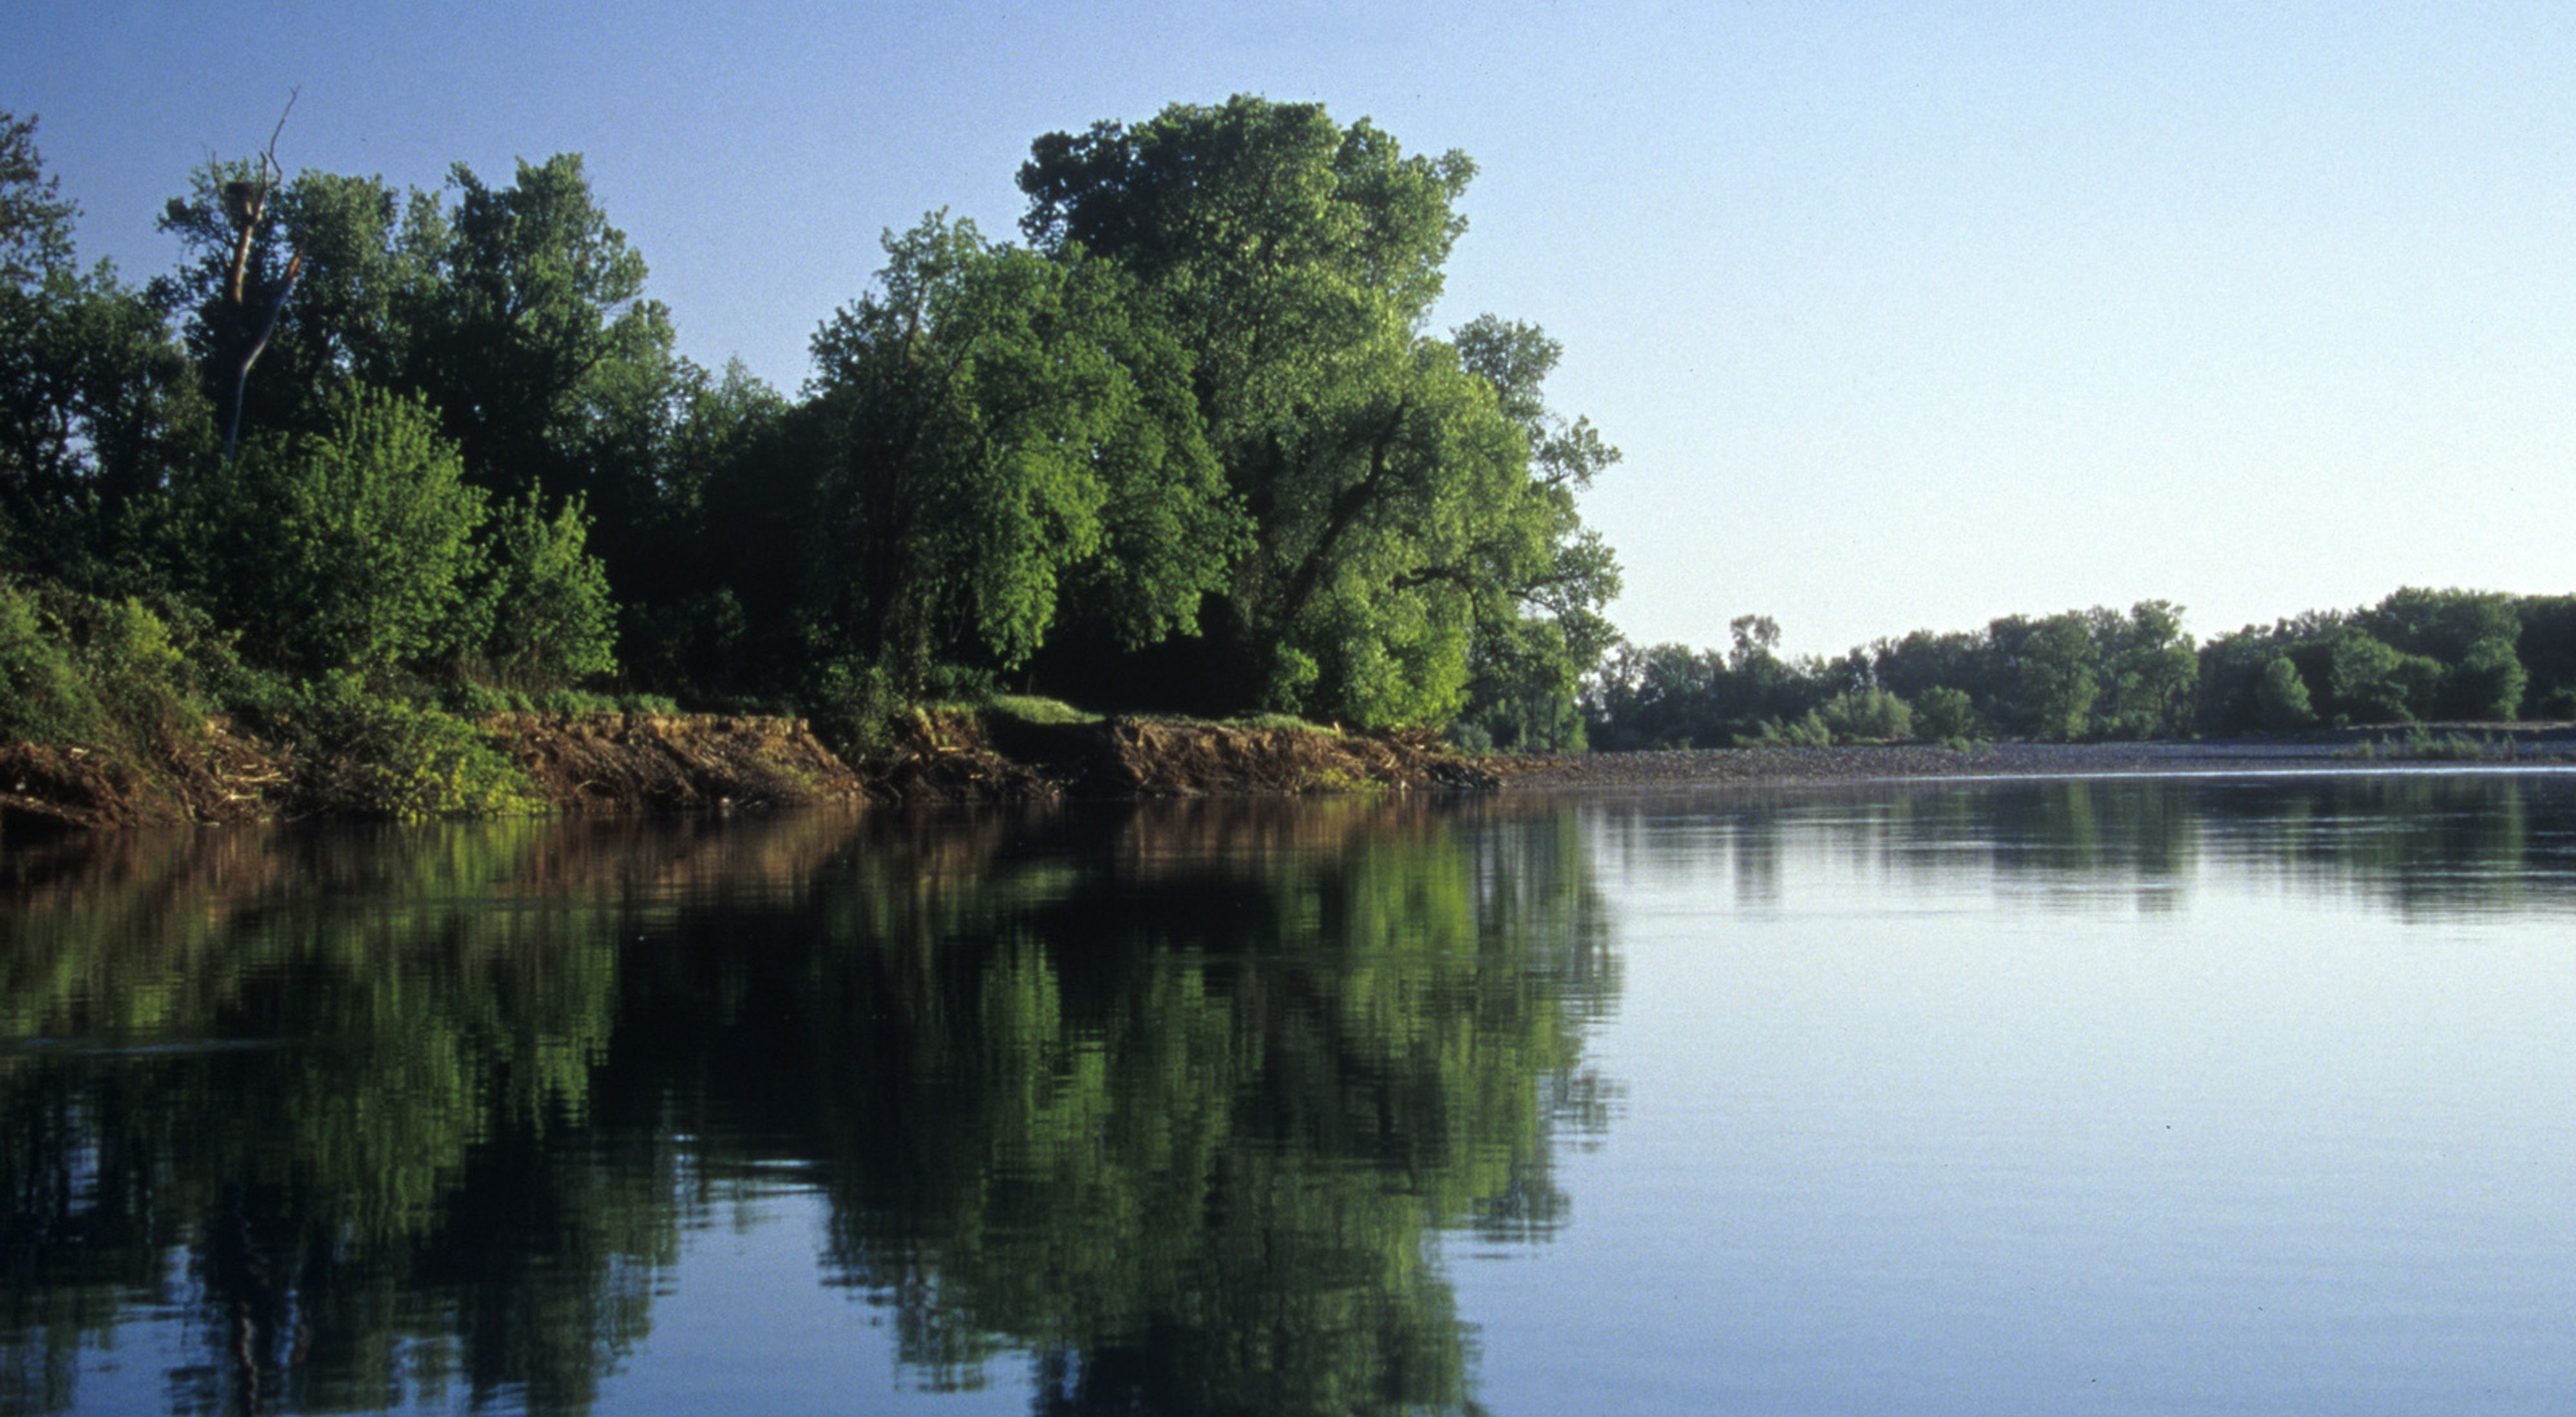 View of tranquil river lined by trees with clear sky overhead.